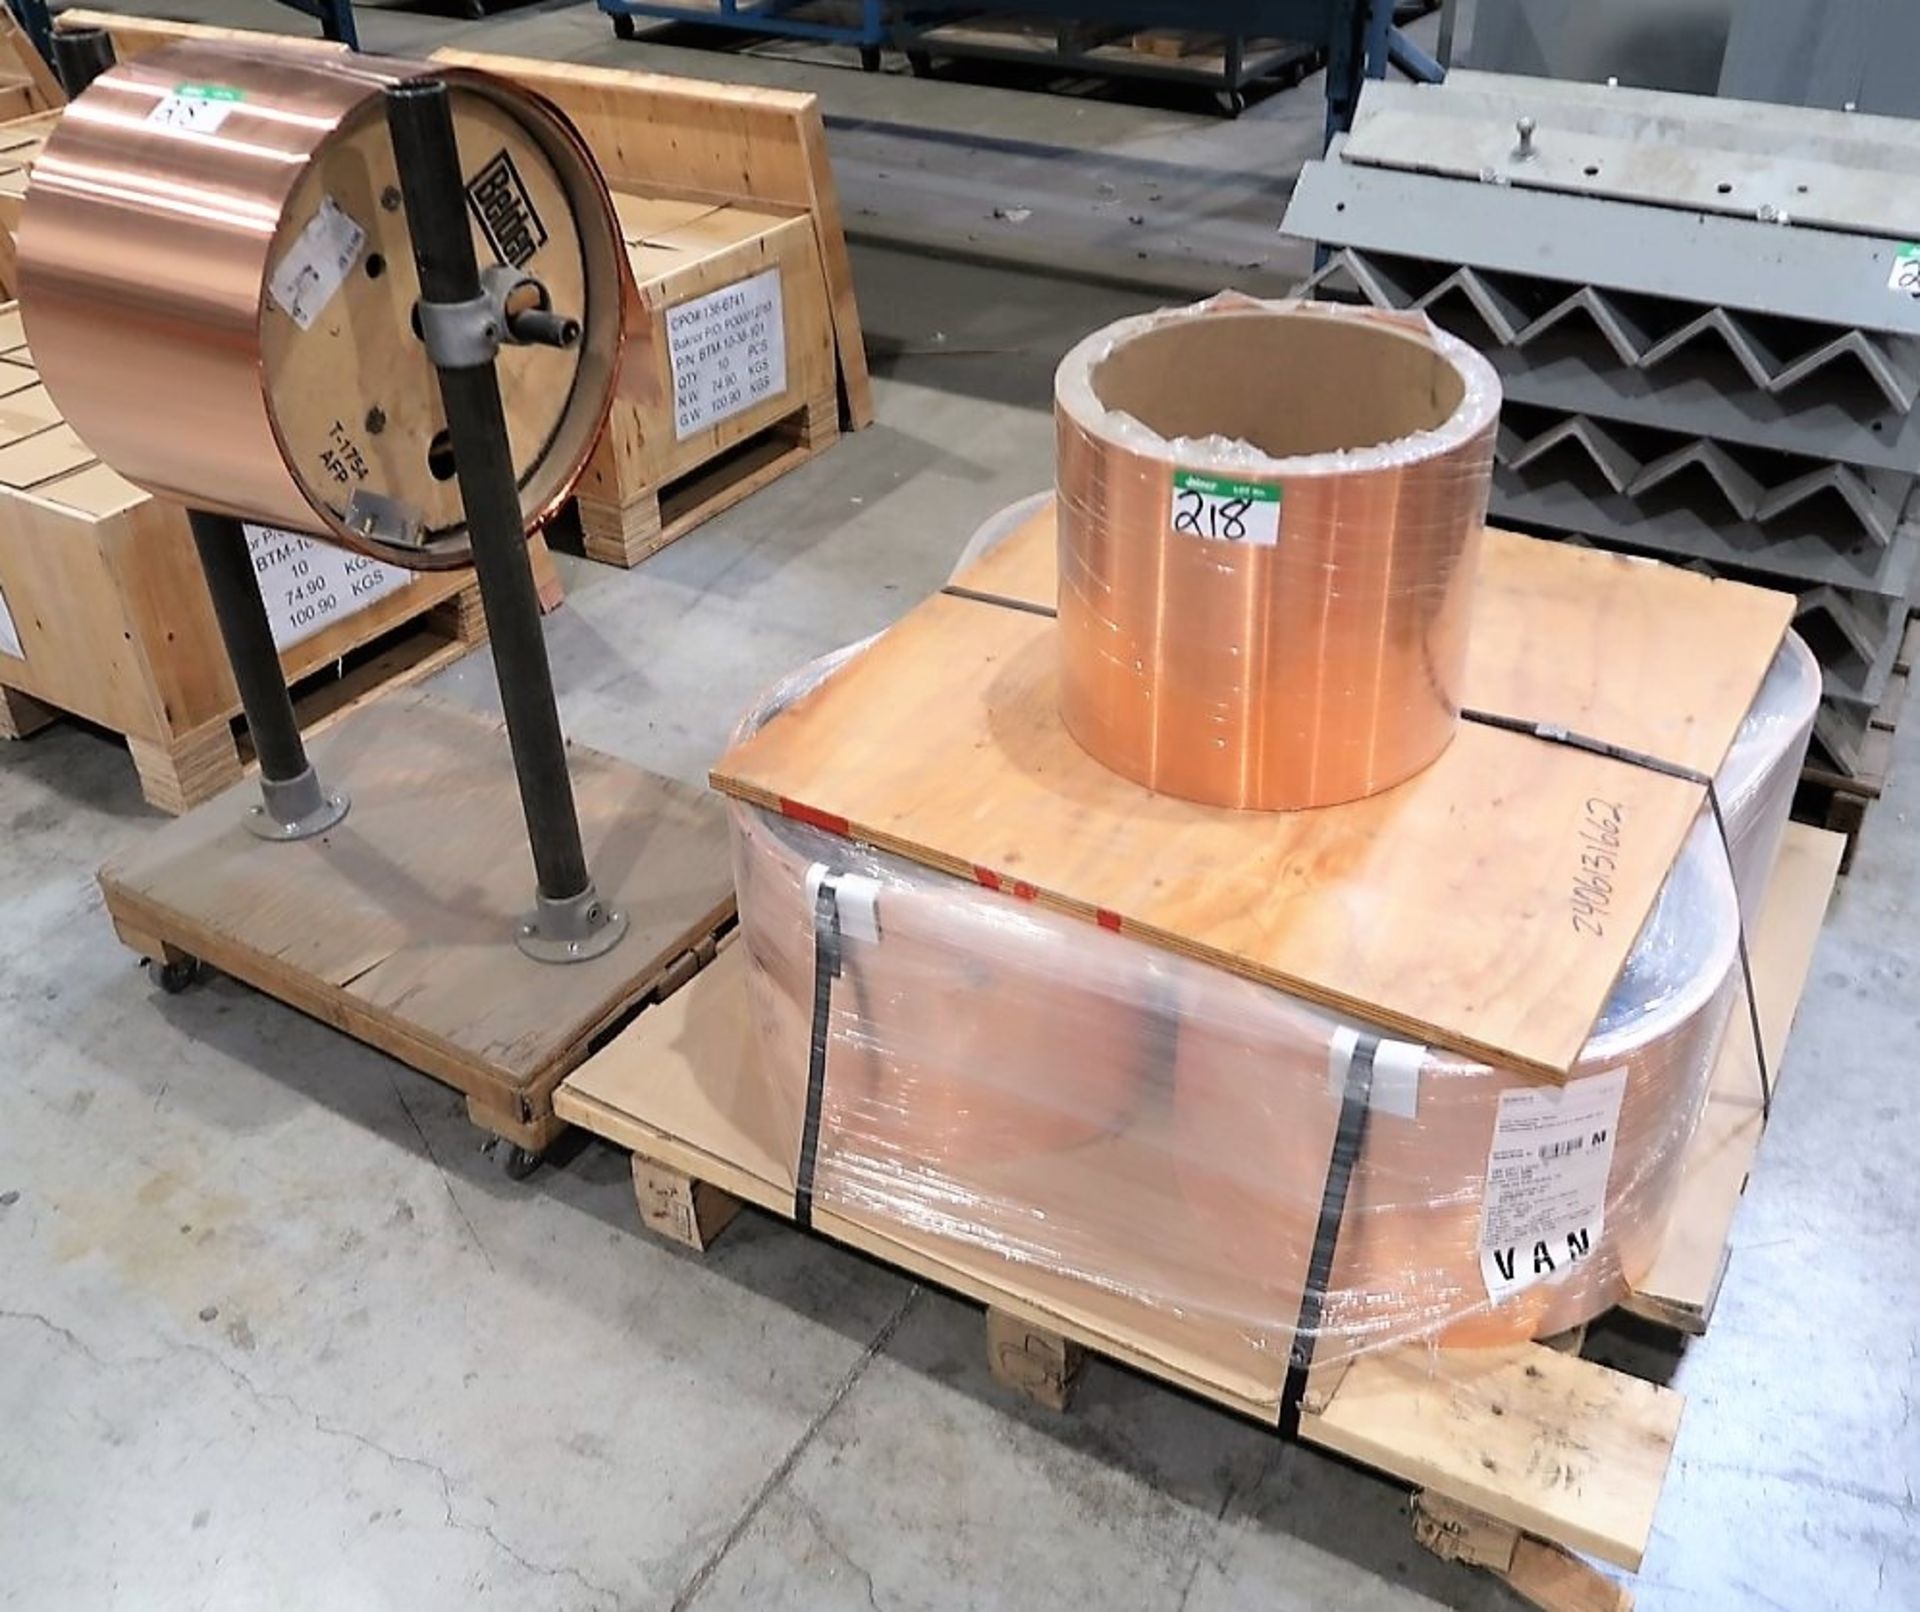 PALLET OF 4 COILS OF 12" W COPPER SHEETING - 200 LBS., 1 ROLL 12 " COPPER APPROX. 50 LBS., ROLL ON